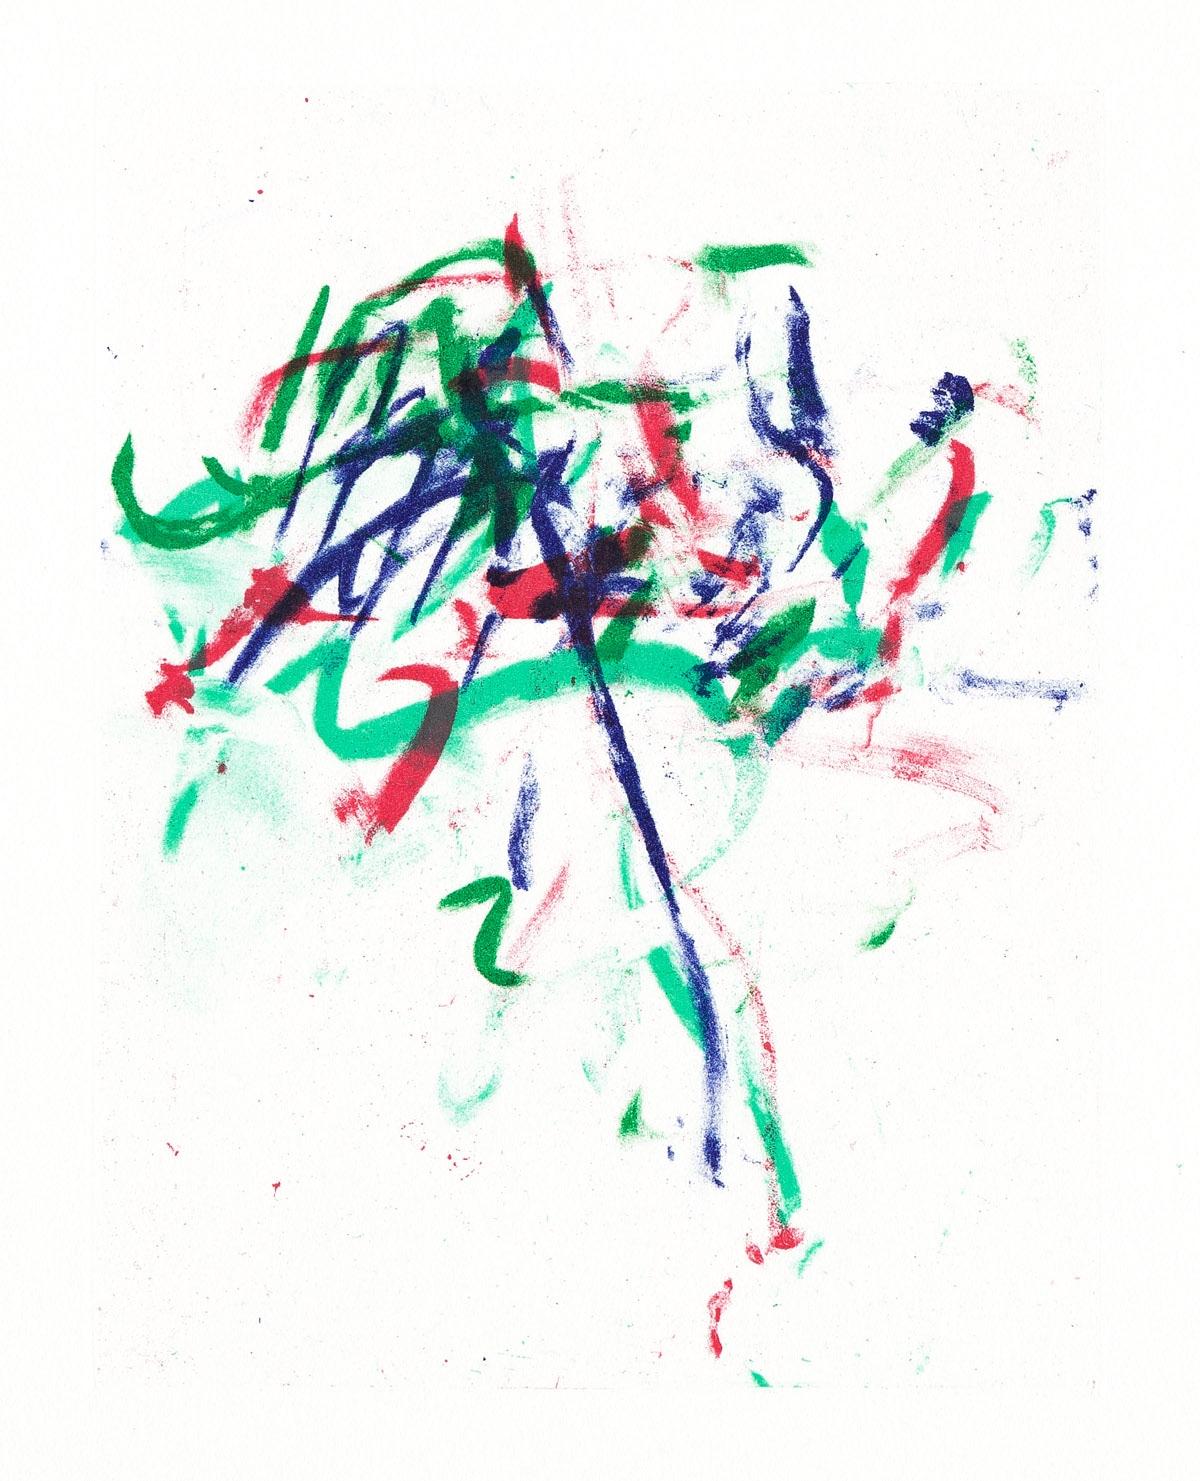 Joan Mitchell
The Little Tree, 1992
Four color lithograph on wove paper
Sheet 8 x 7 inches
Published by Tyler Graphics. Mount Kisco, NY
In unsigned edition of 1000

Joan Mitchell is perhaps best known as a second-generation member of the New York